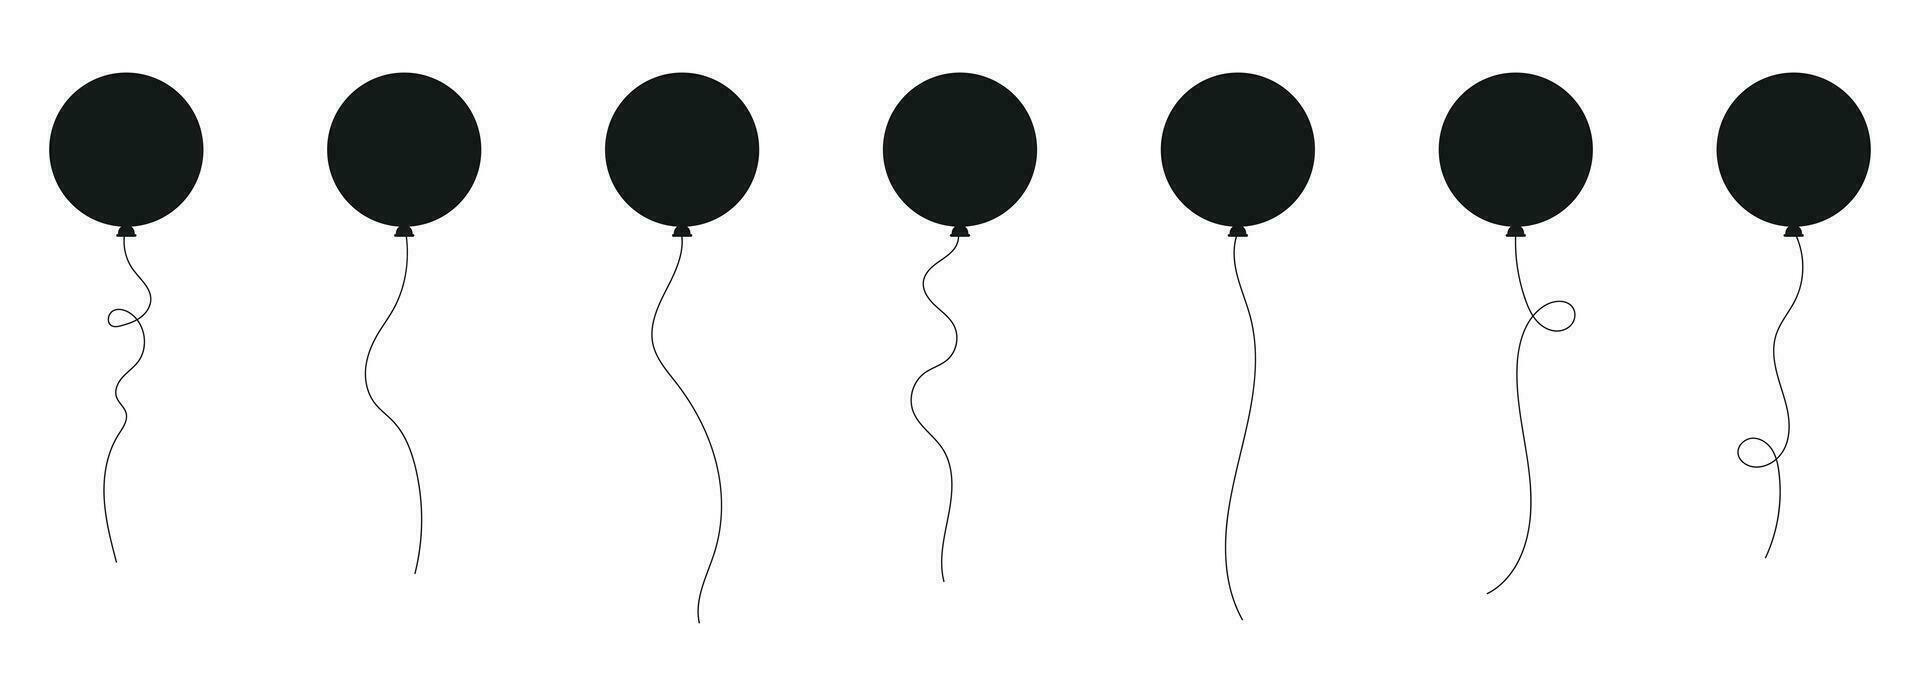 Set of black silhouette party balloons tied with strings. Vector illustration in cartoon style